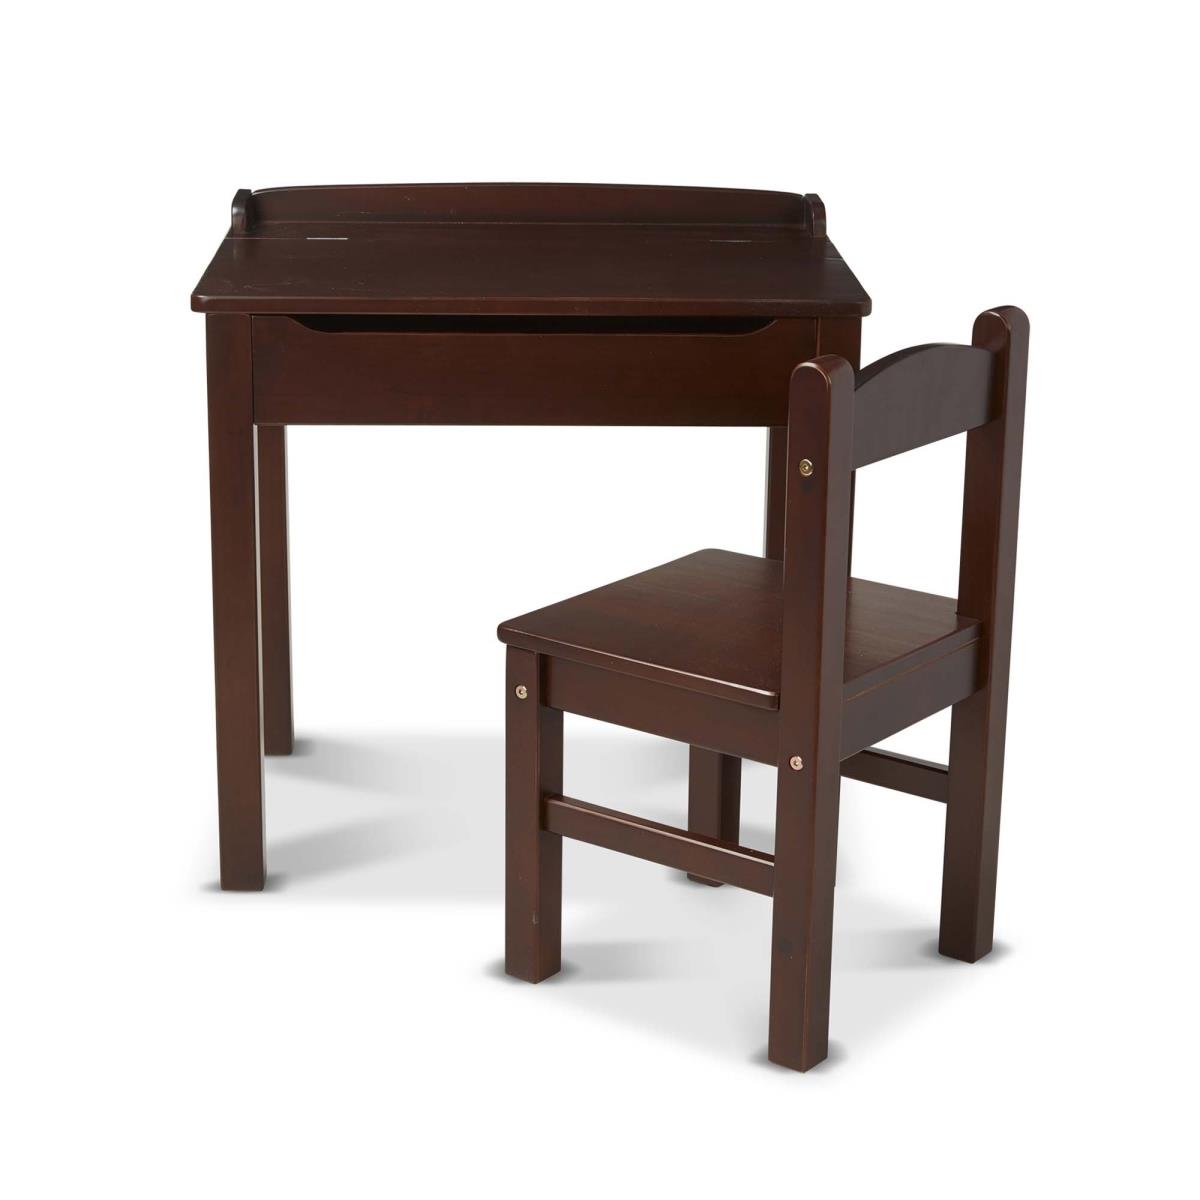 Picture of Melissa & Doug 30232 26.75 x 10.25 x 19 in. Wooden Lift-Top Desk & Chair in Espresso